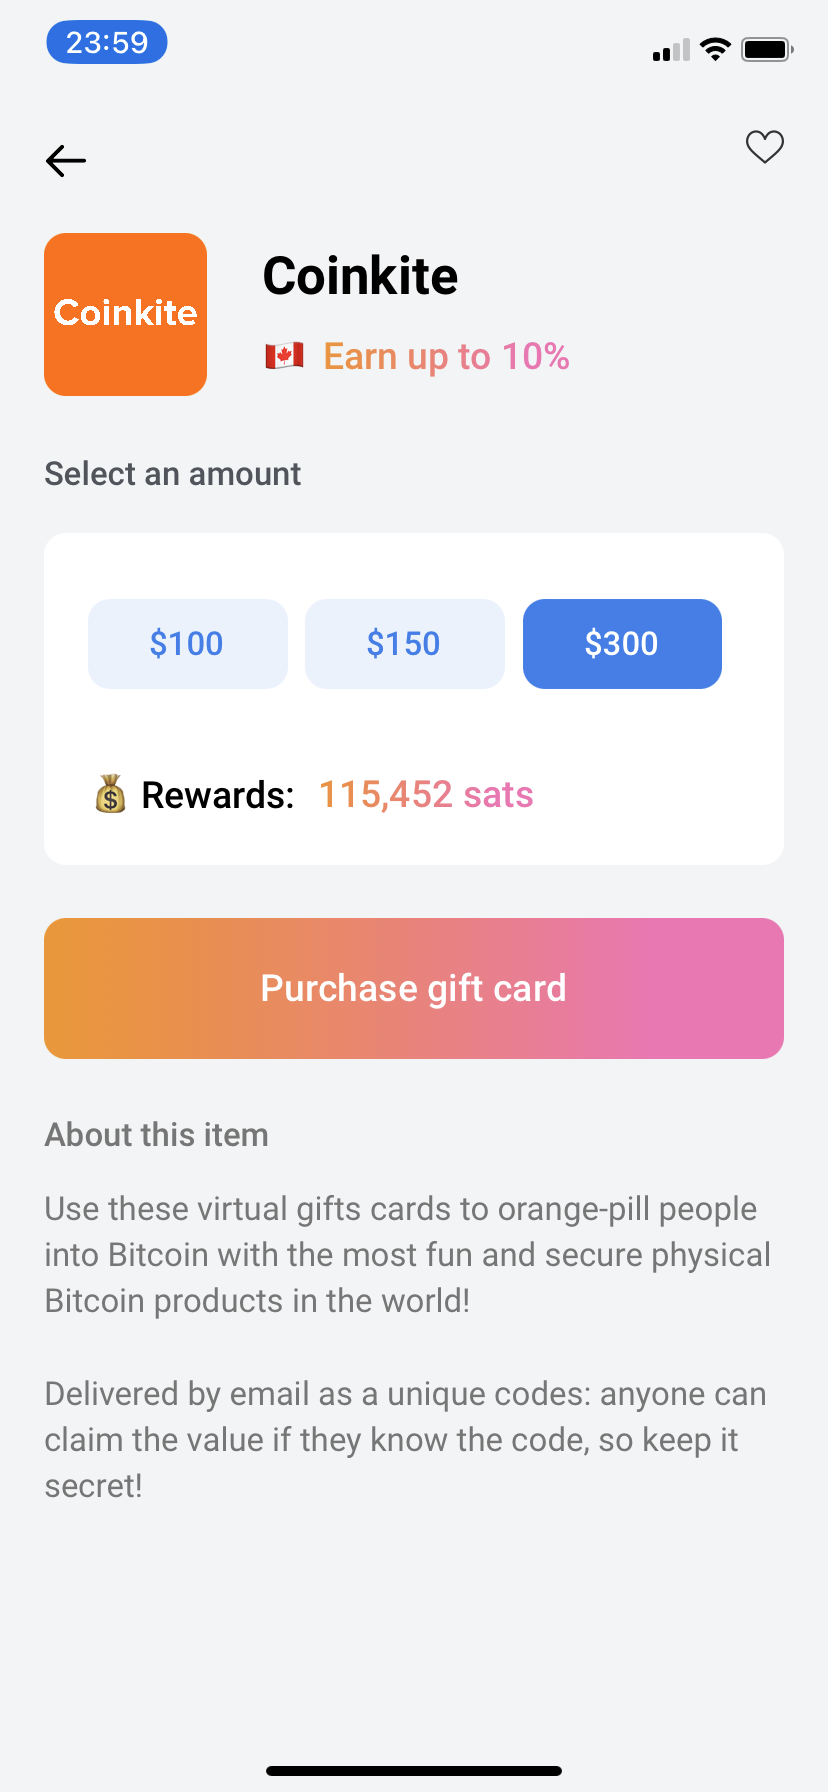 How To Buy A Gift Card With The Bitcoin Company Step 3